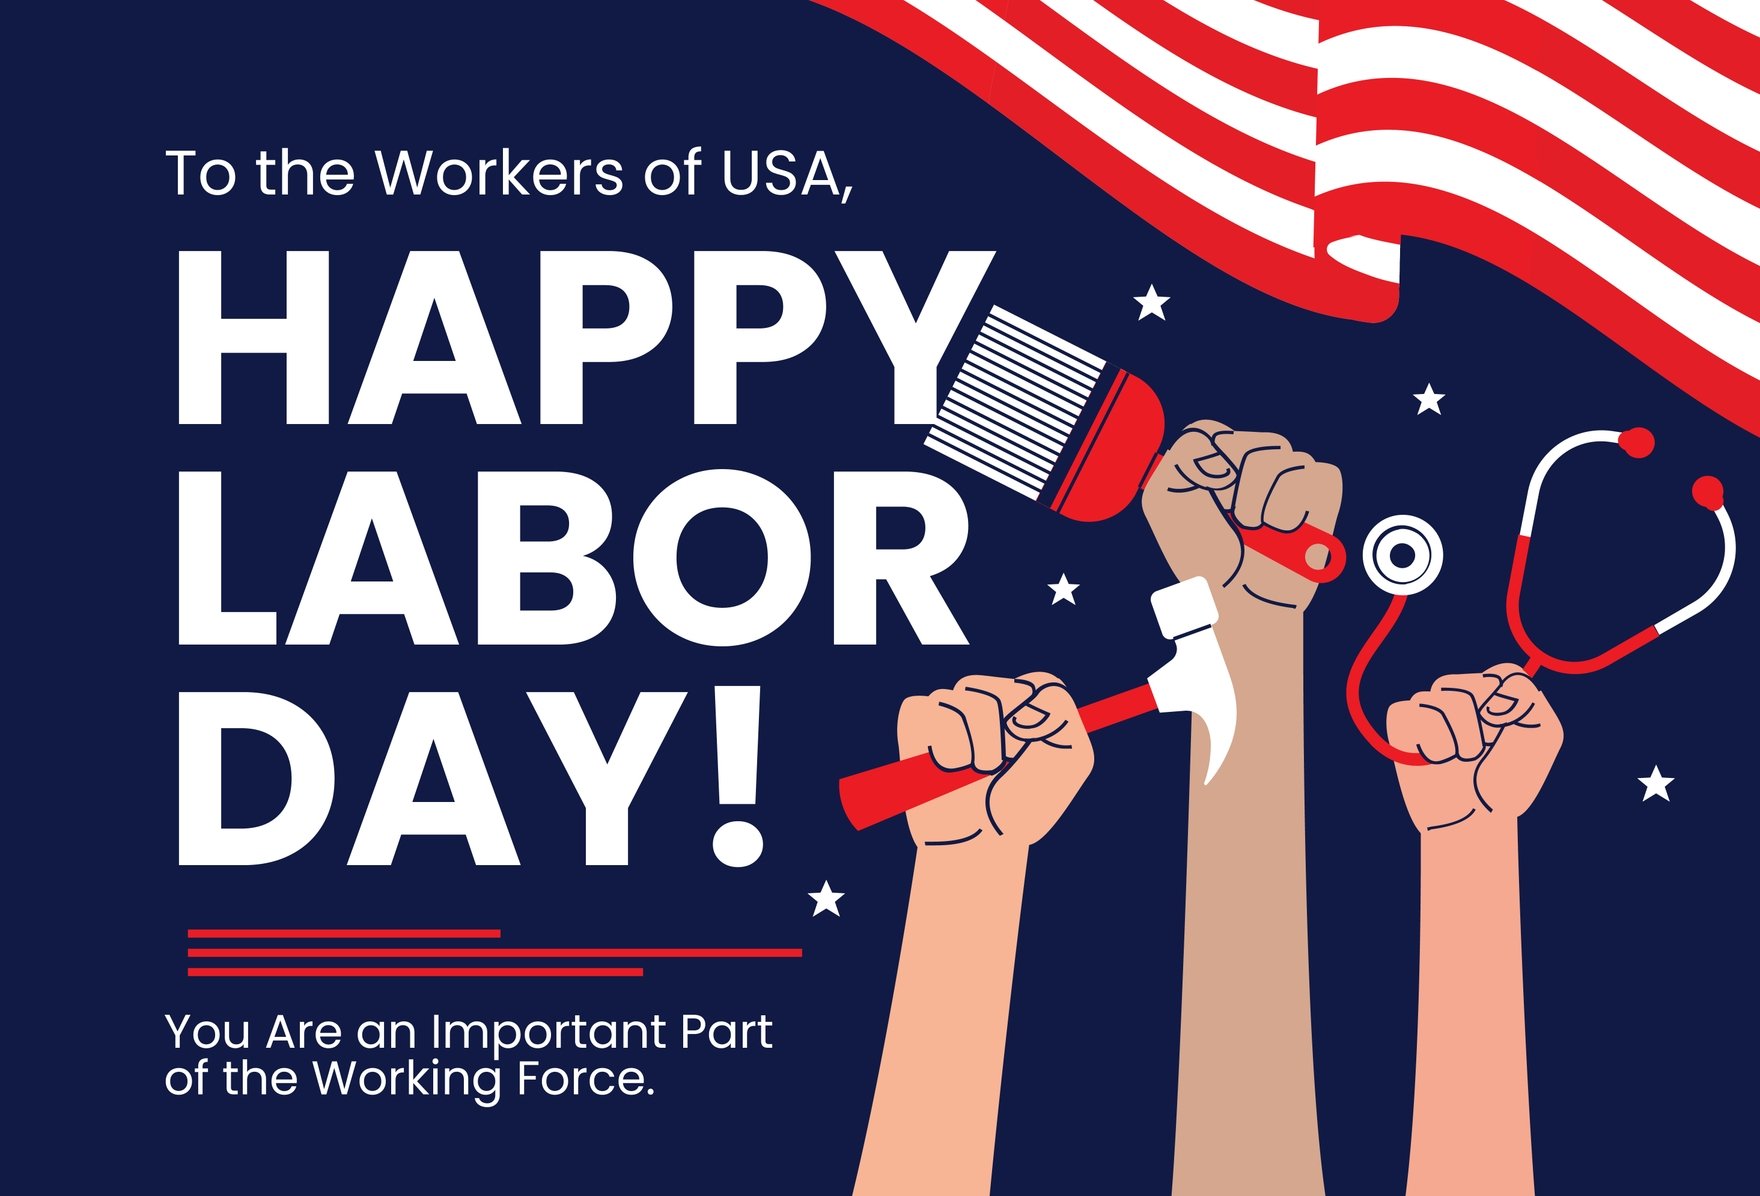 USA Labor Day Greeting Card in Word, Illustrator, PSD